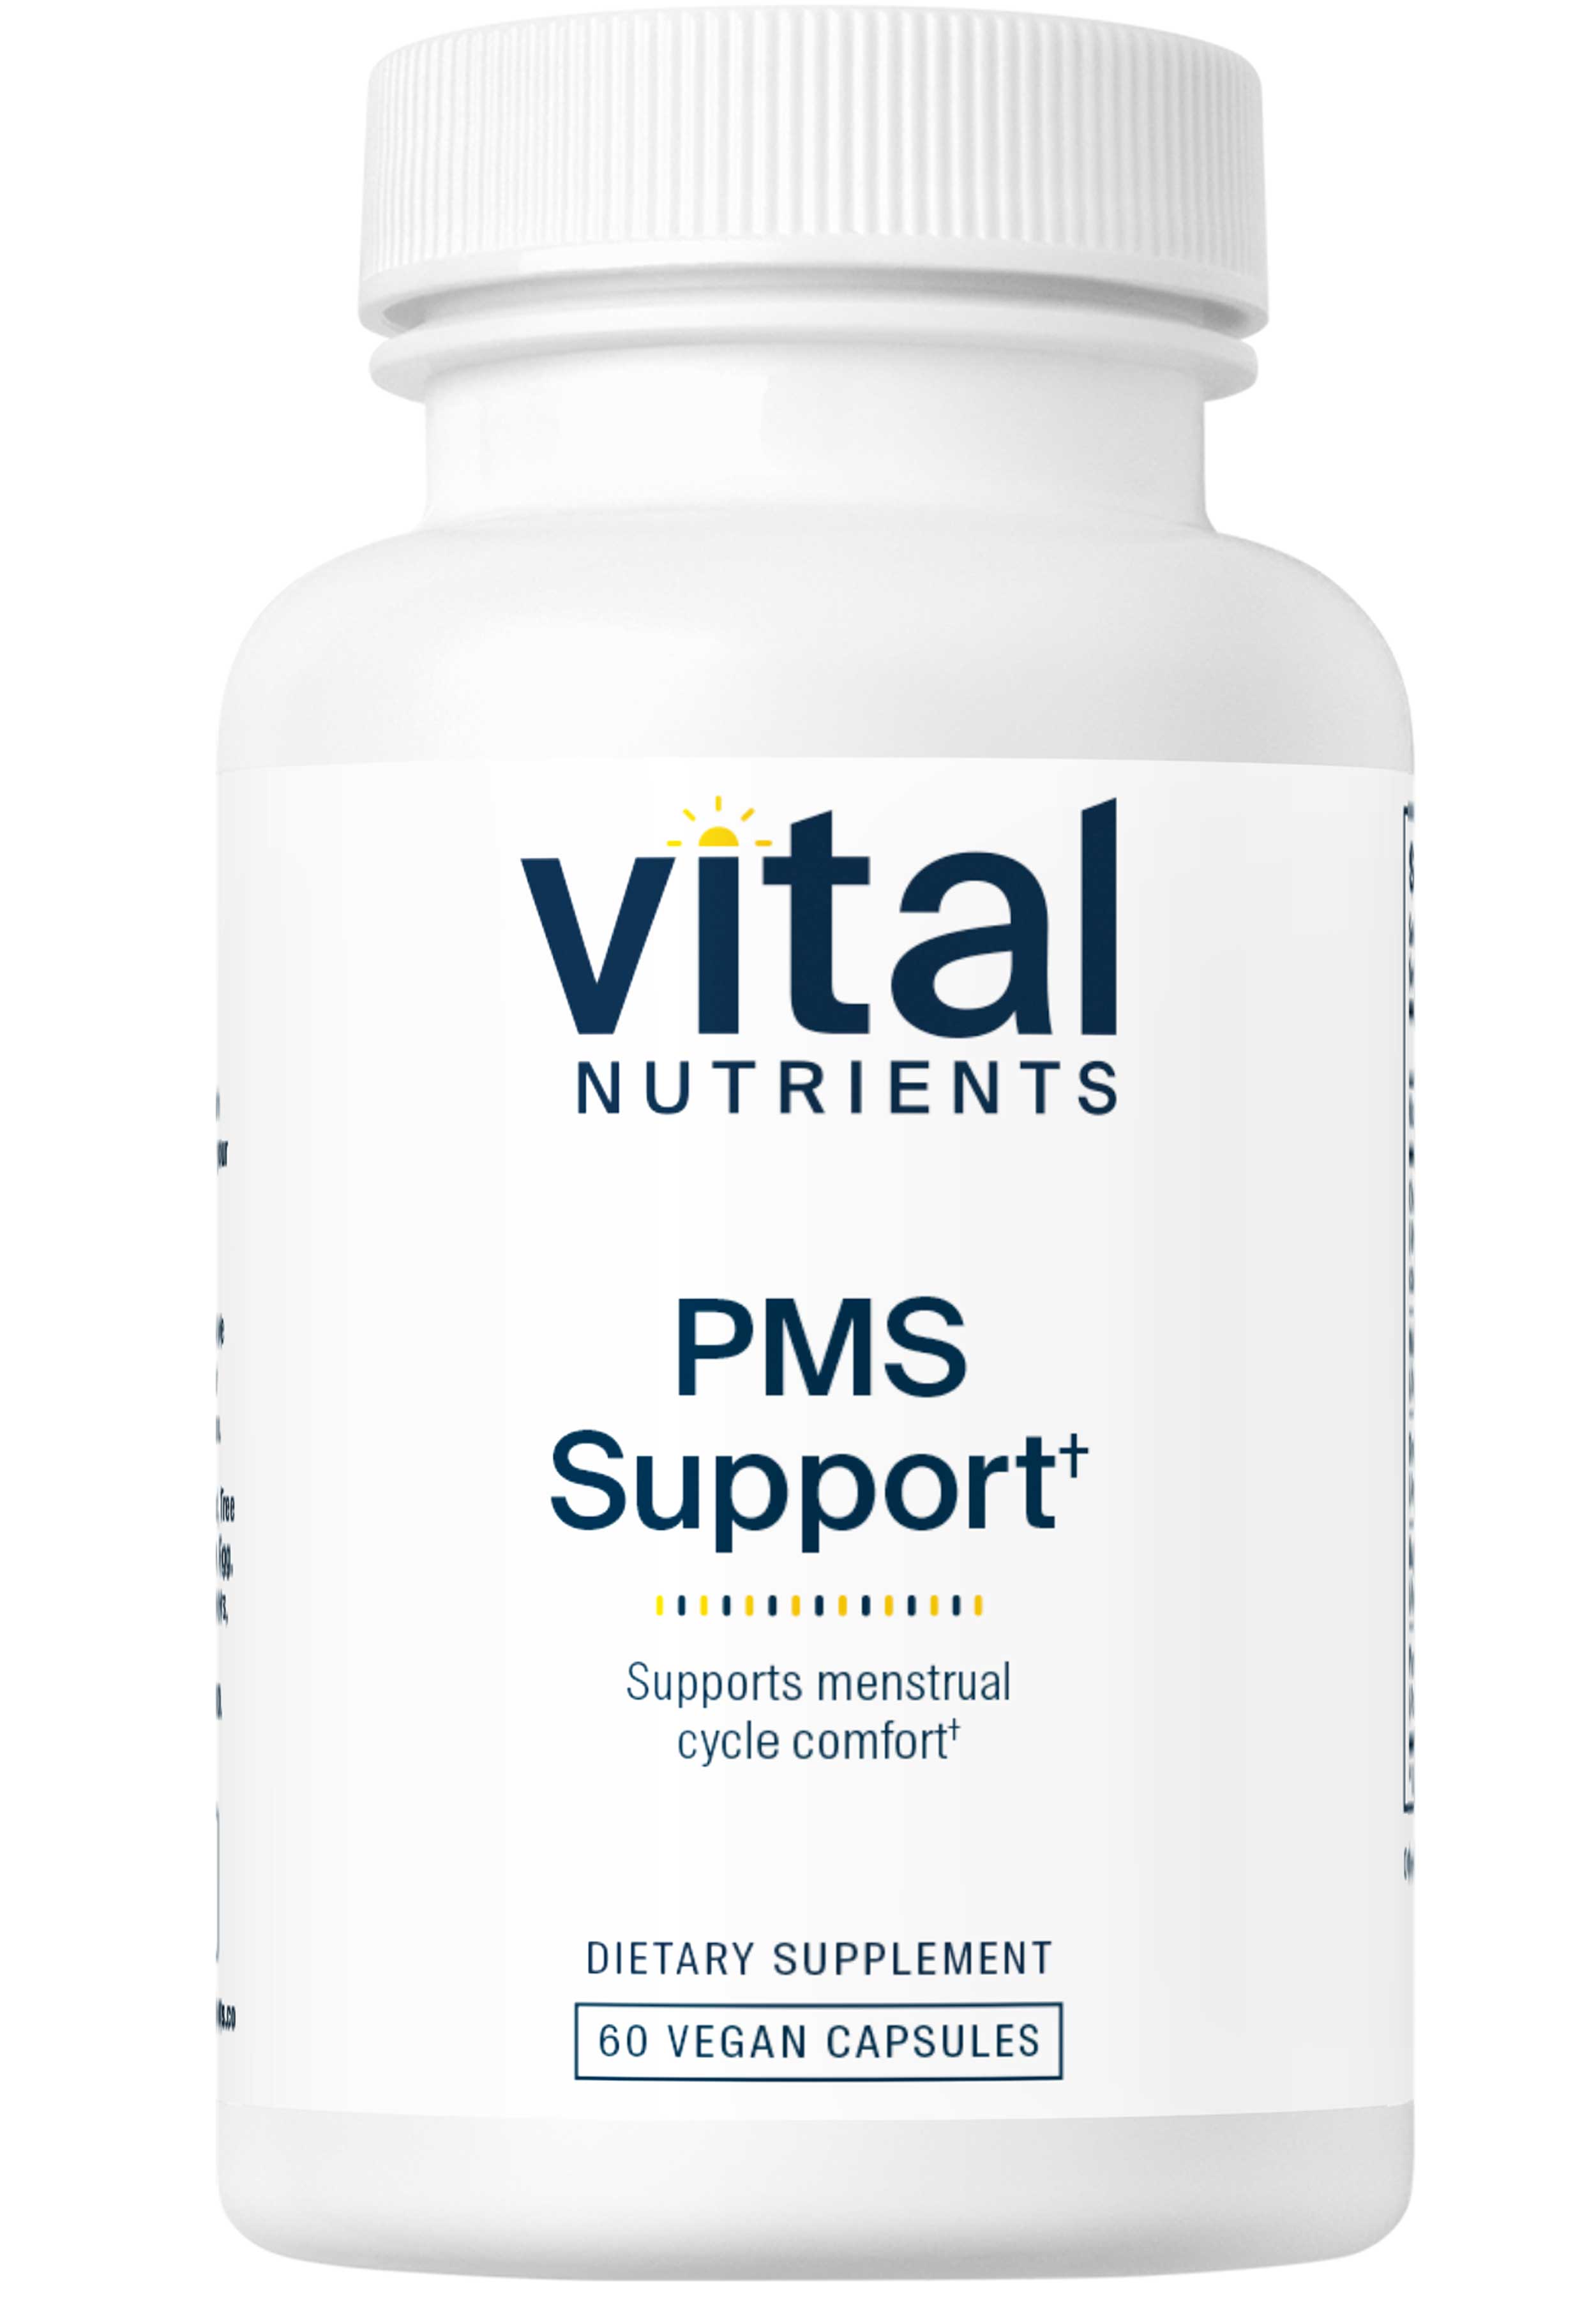 Vital Nutrients PMS Support